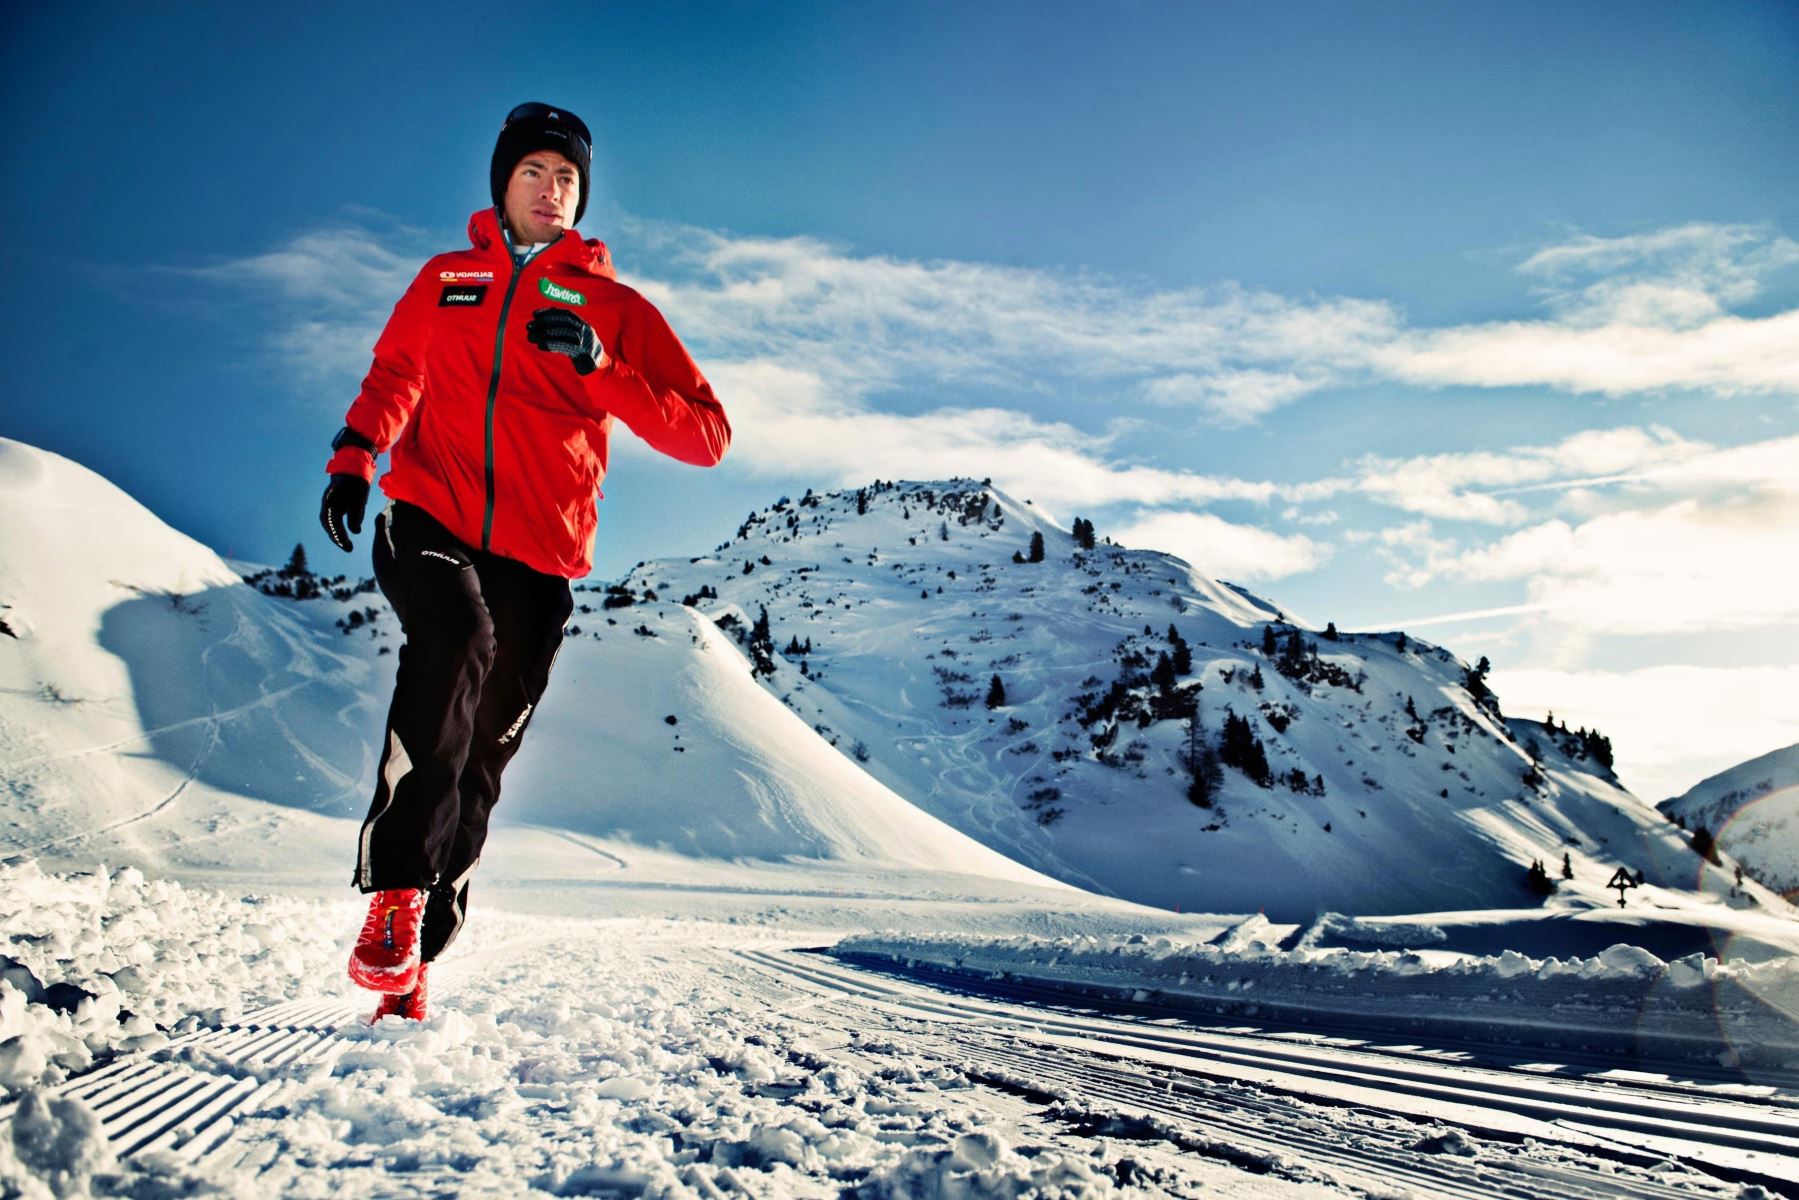 The Incredible Feat Of Kilian Jornet: Running Up Mount Everest